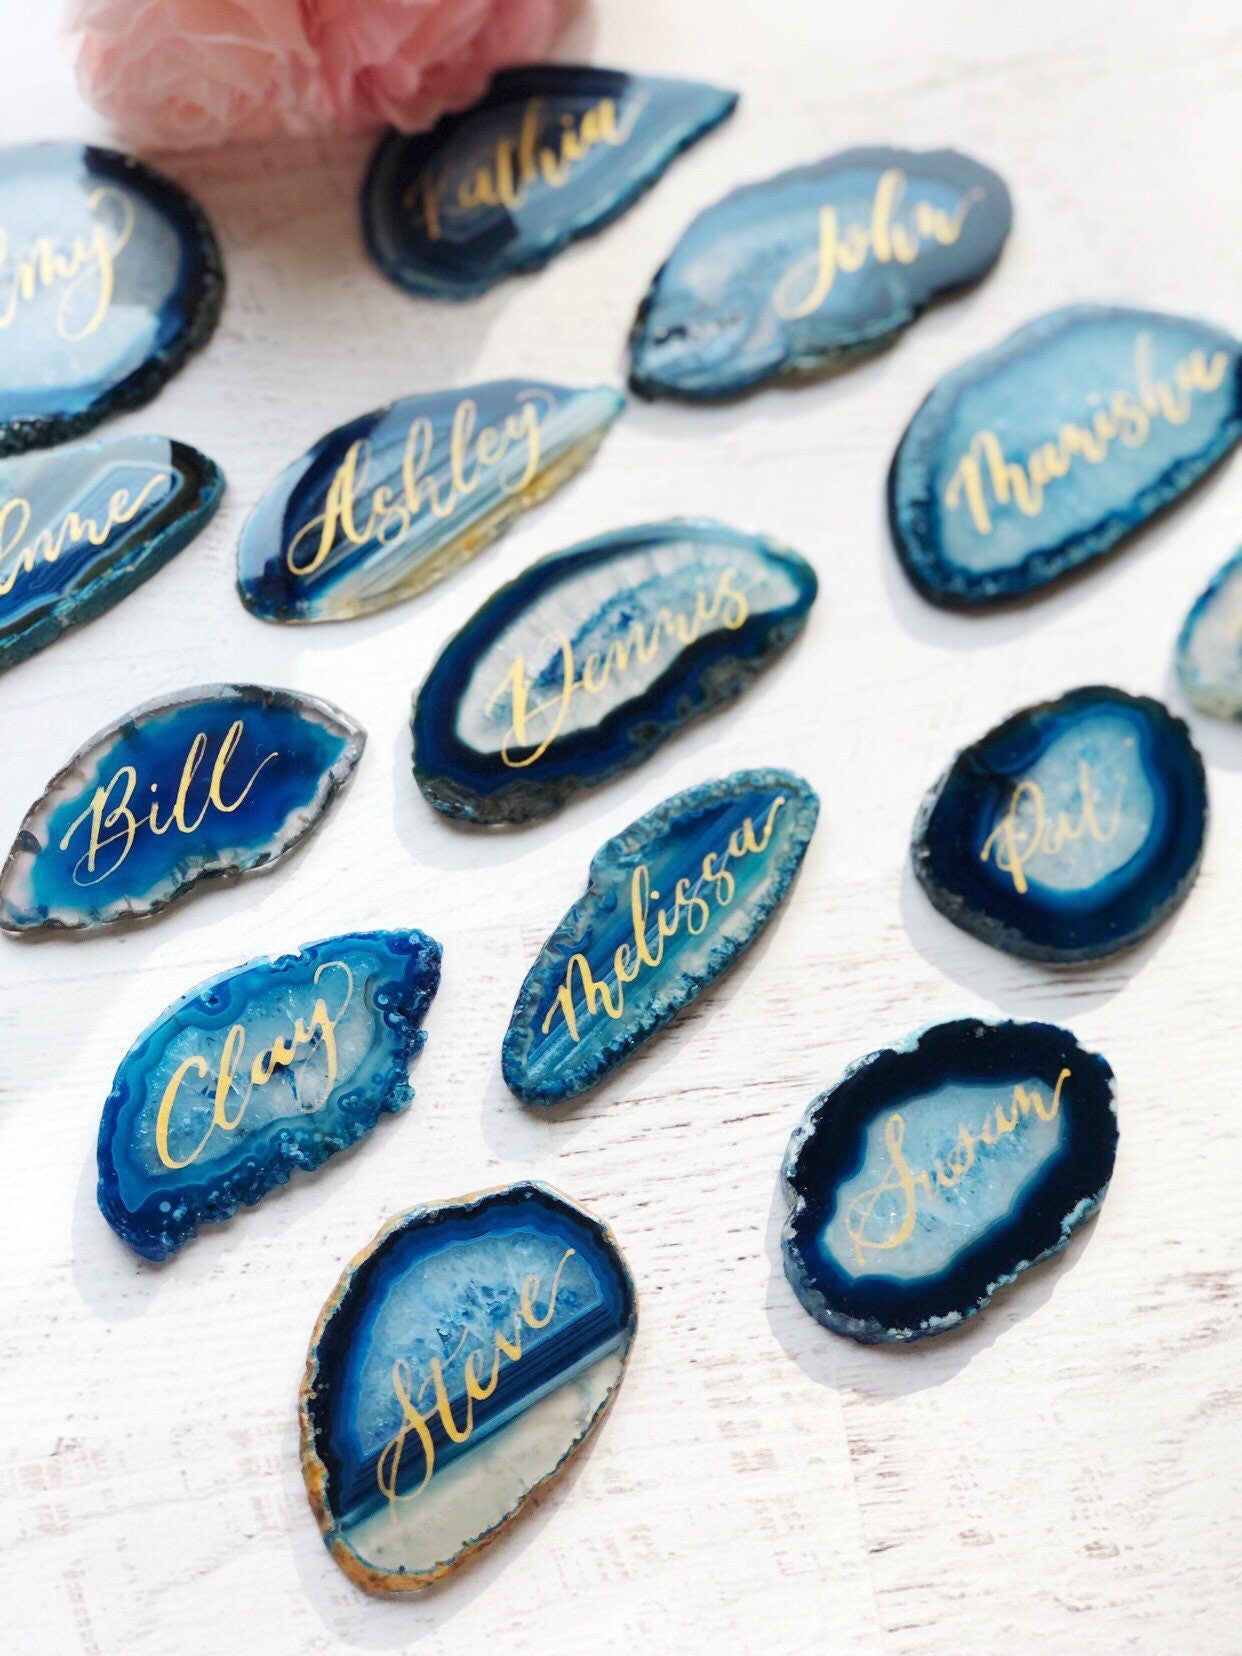 2.5" - 3" Blue Agate Slice Calligraphy Name Place Cards | Agate Calligraphy Name Cards